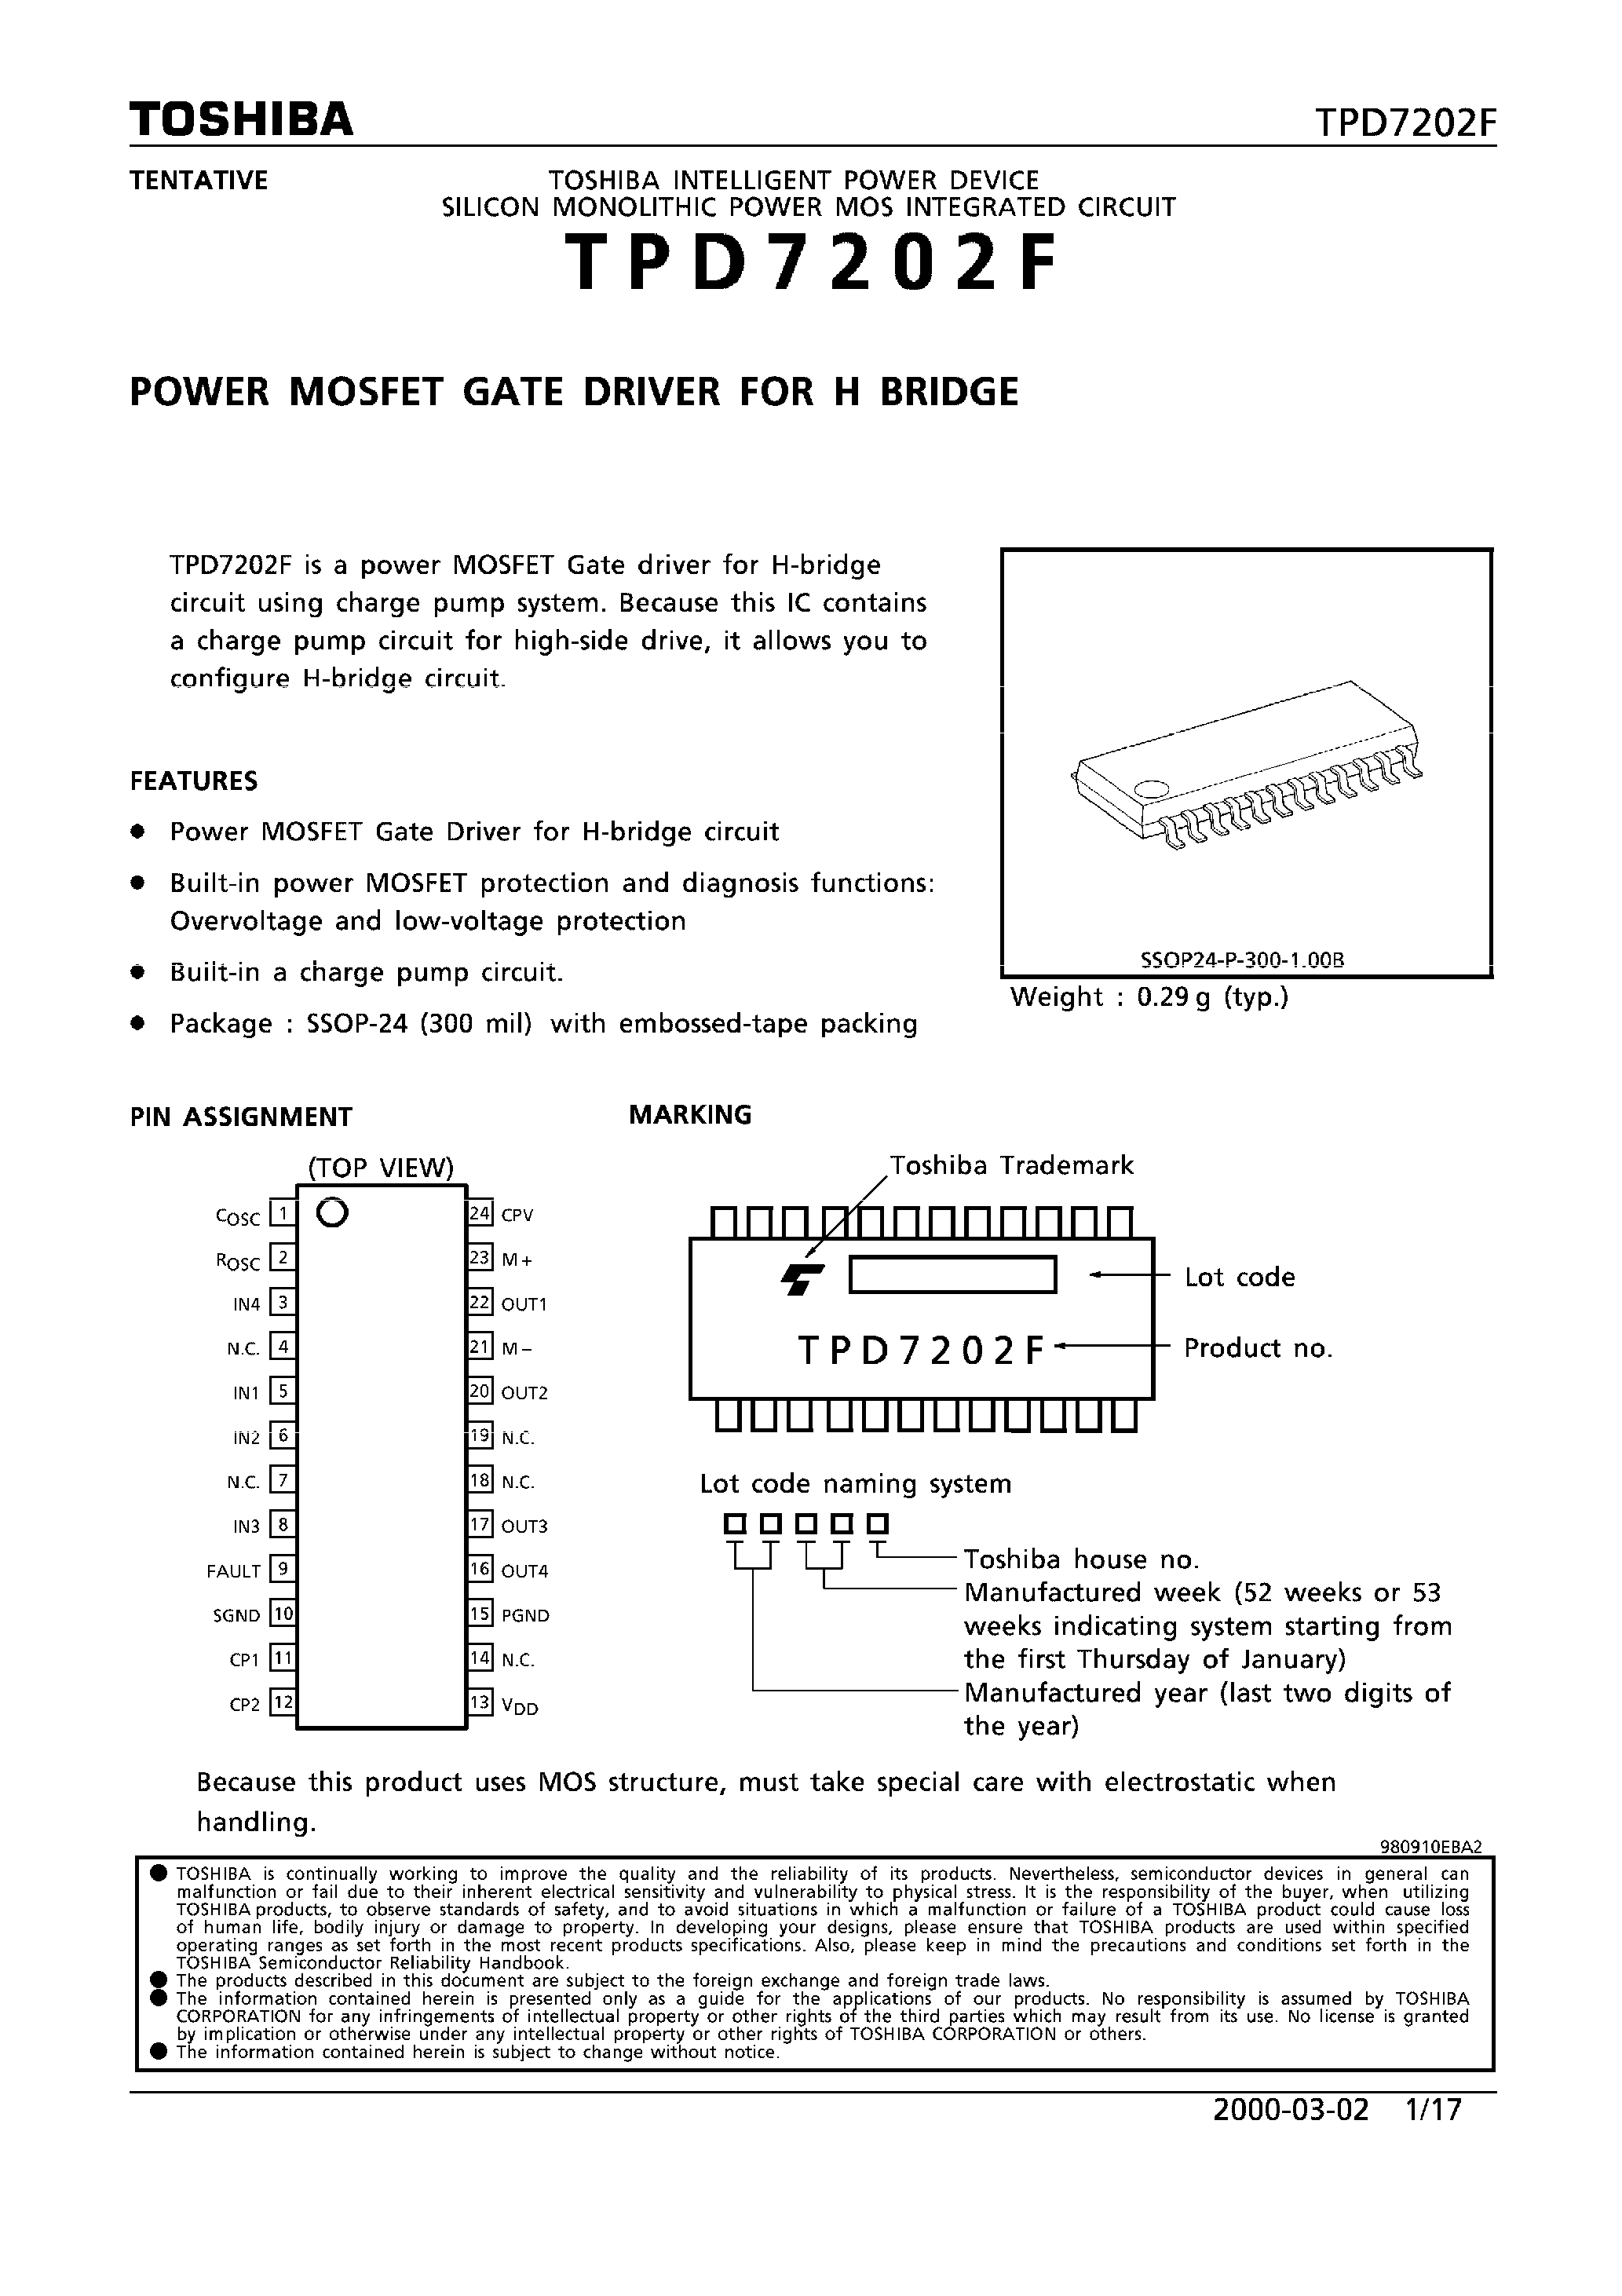 Даташит TPD7202F - POWER MOSFET GATE DRIVER FOR H BRIDGE страница 1